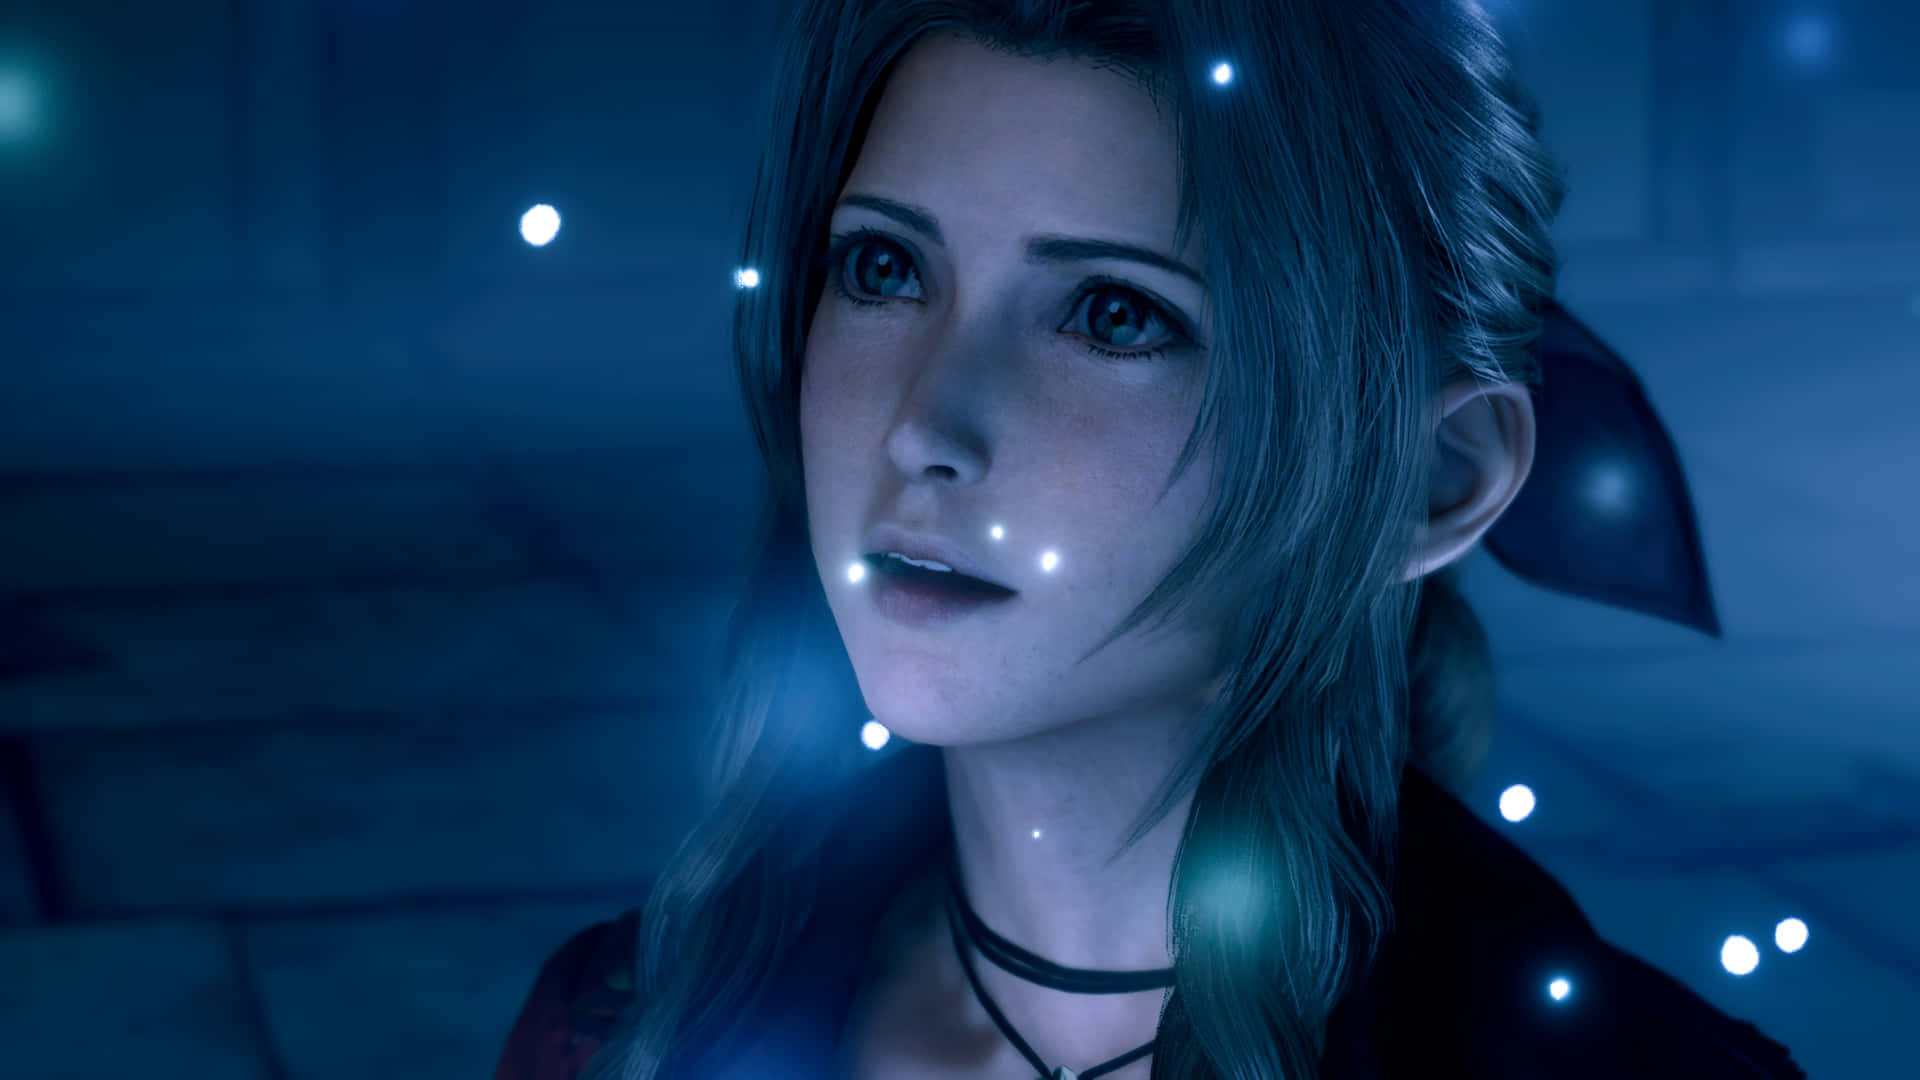 Caption: Gorgeous, Detailed Portrait Of Aerith Gainsborough From Final Fantasy Vii Wallpaper